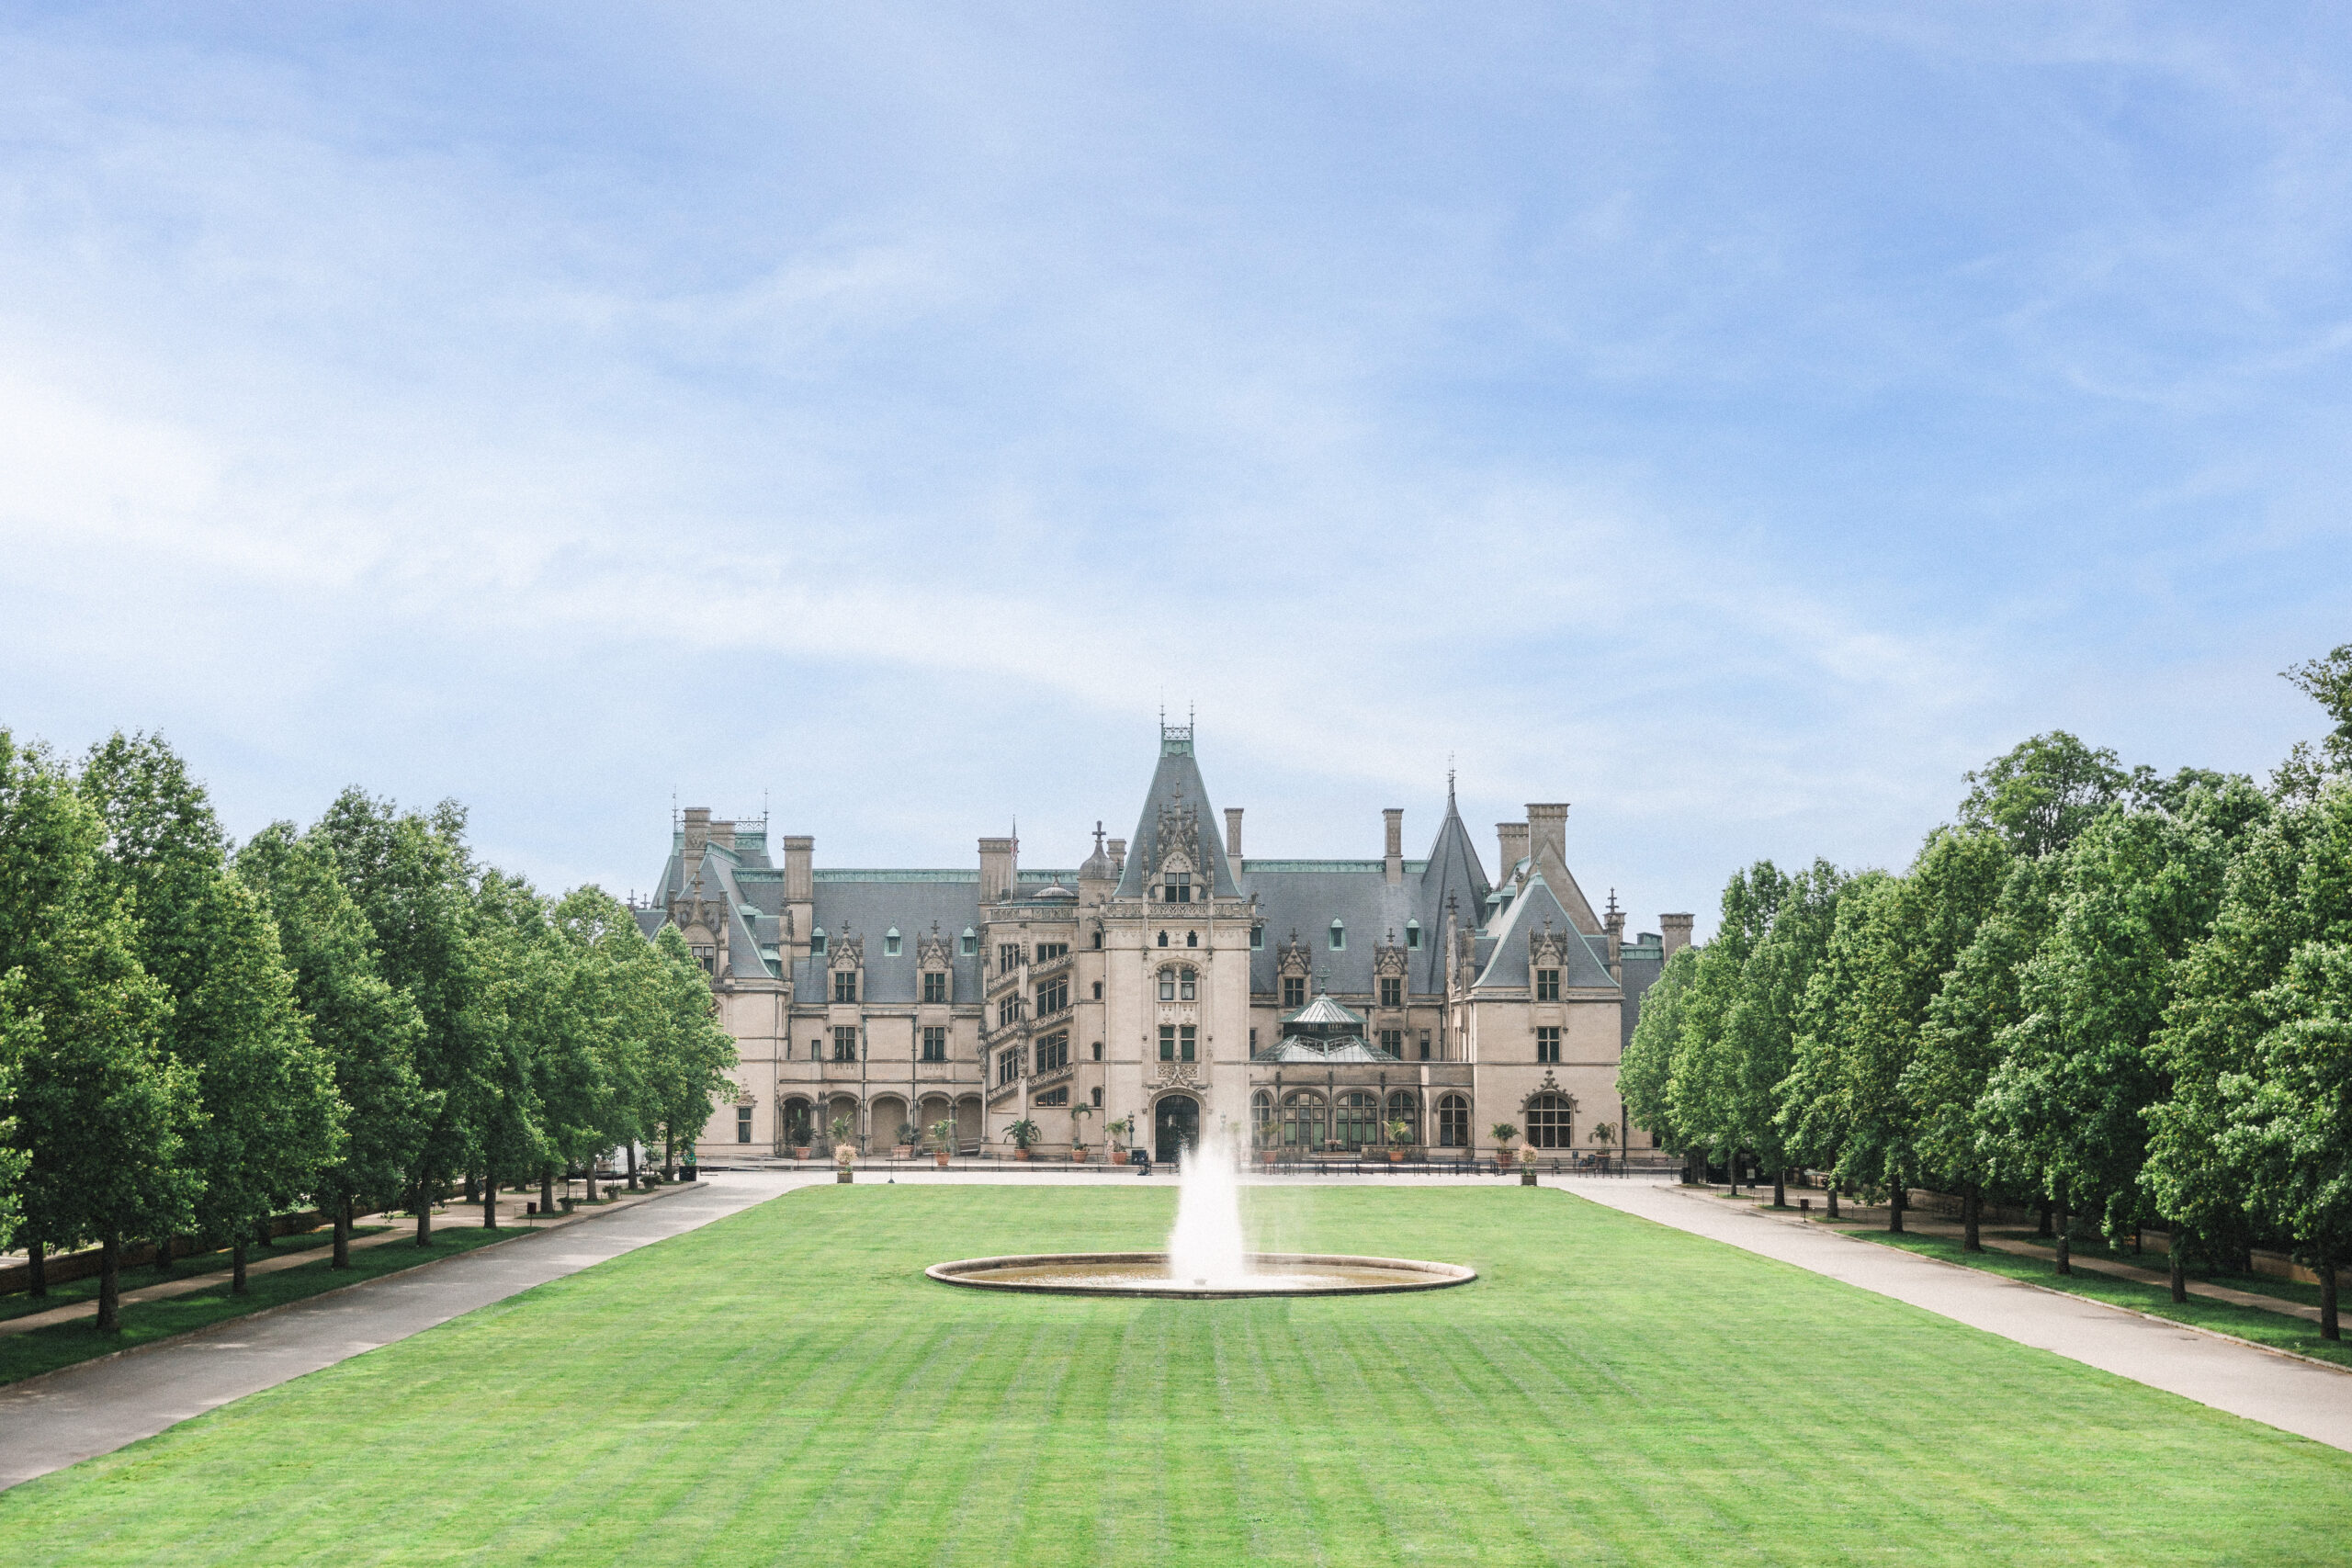 A frontal view of the largest home in the United States, the Biltmore Estate. An Art Deco masterpiece of the gilded age.